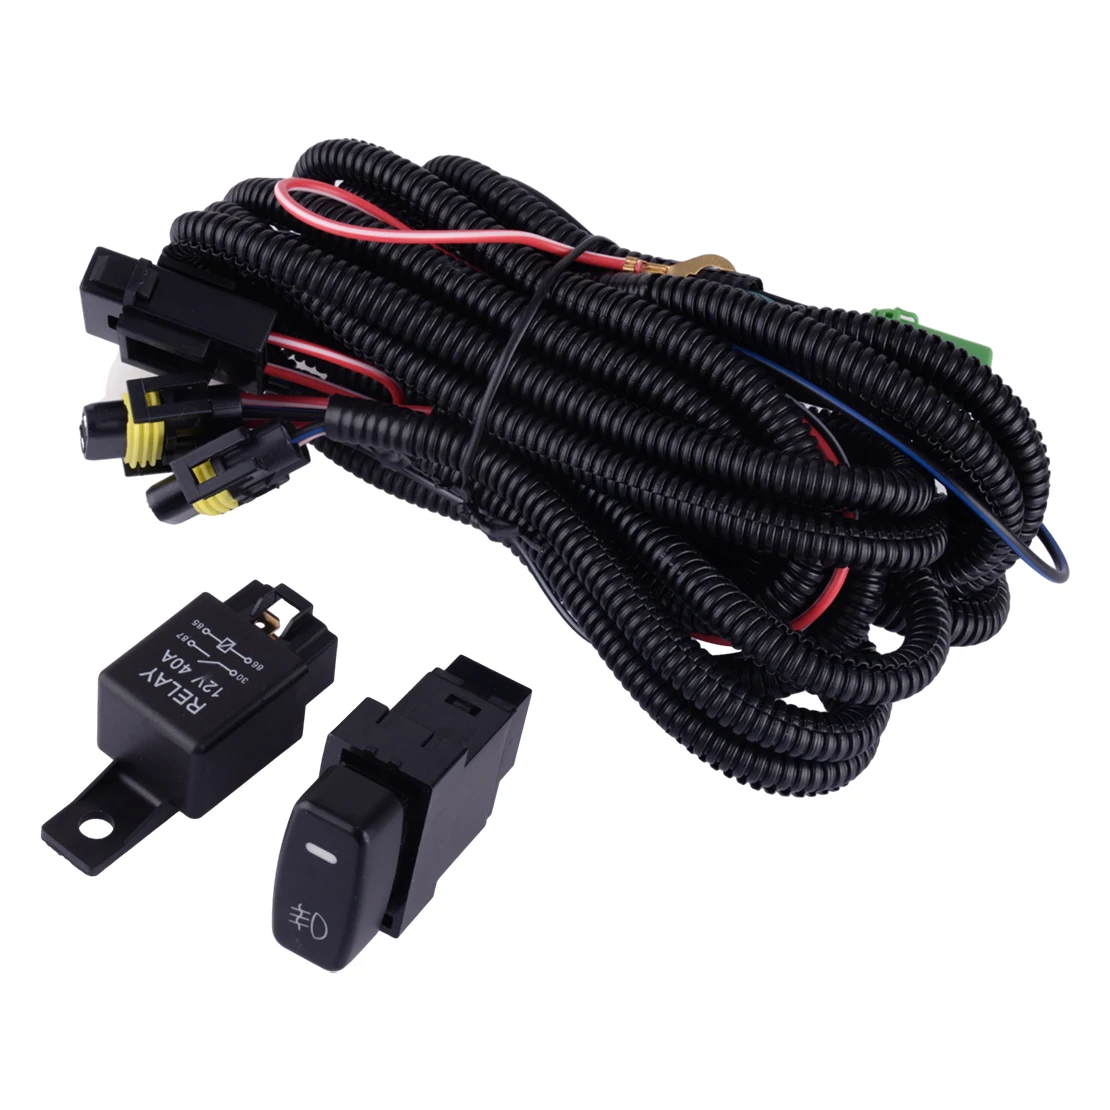 

H10 H12 HB3 HB4 HIR2 Fog Light Wire Harness LED Relay Switch Fit for Mitsubishi Outlander Lancer Pajero Eclipse Grandis 12V 40A